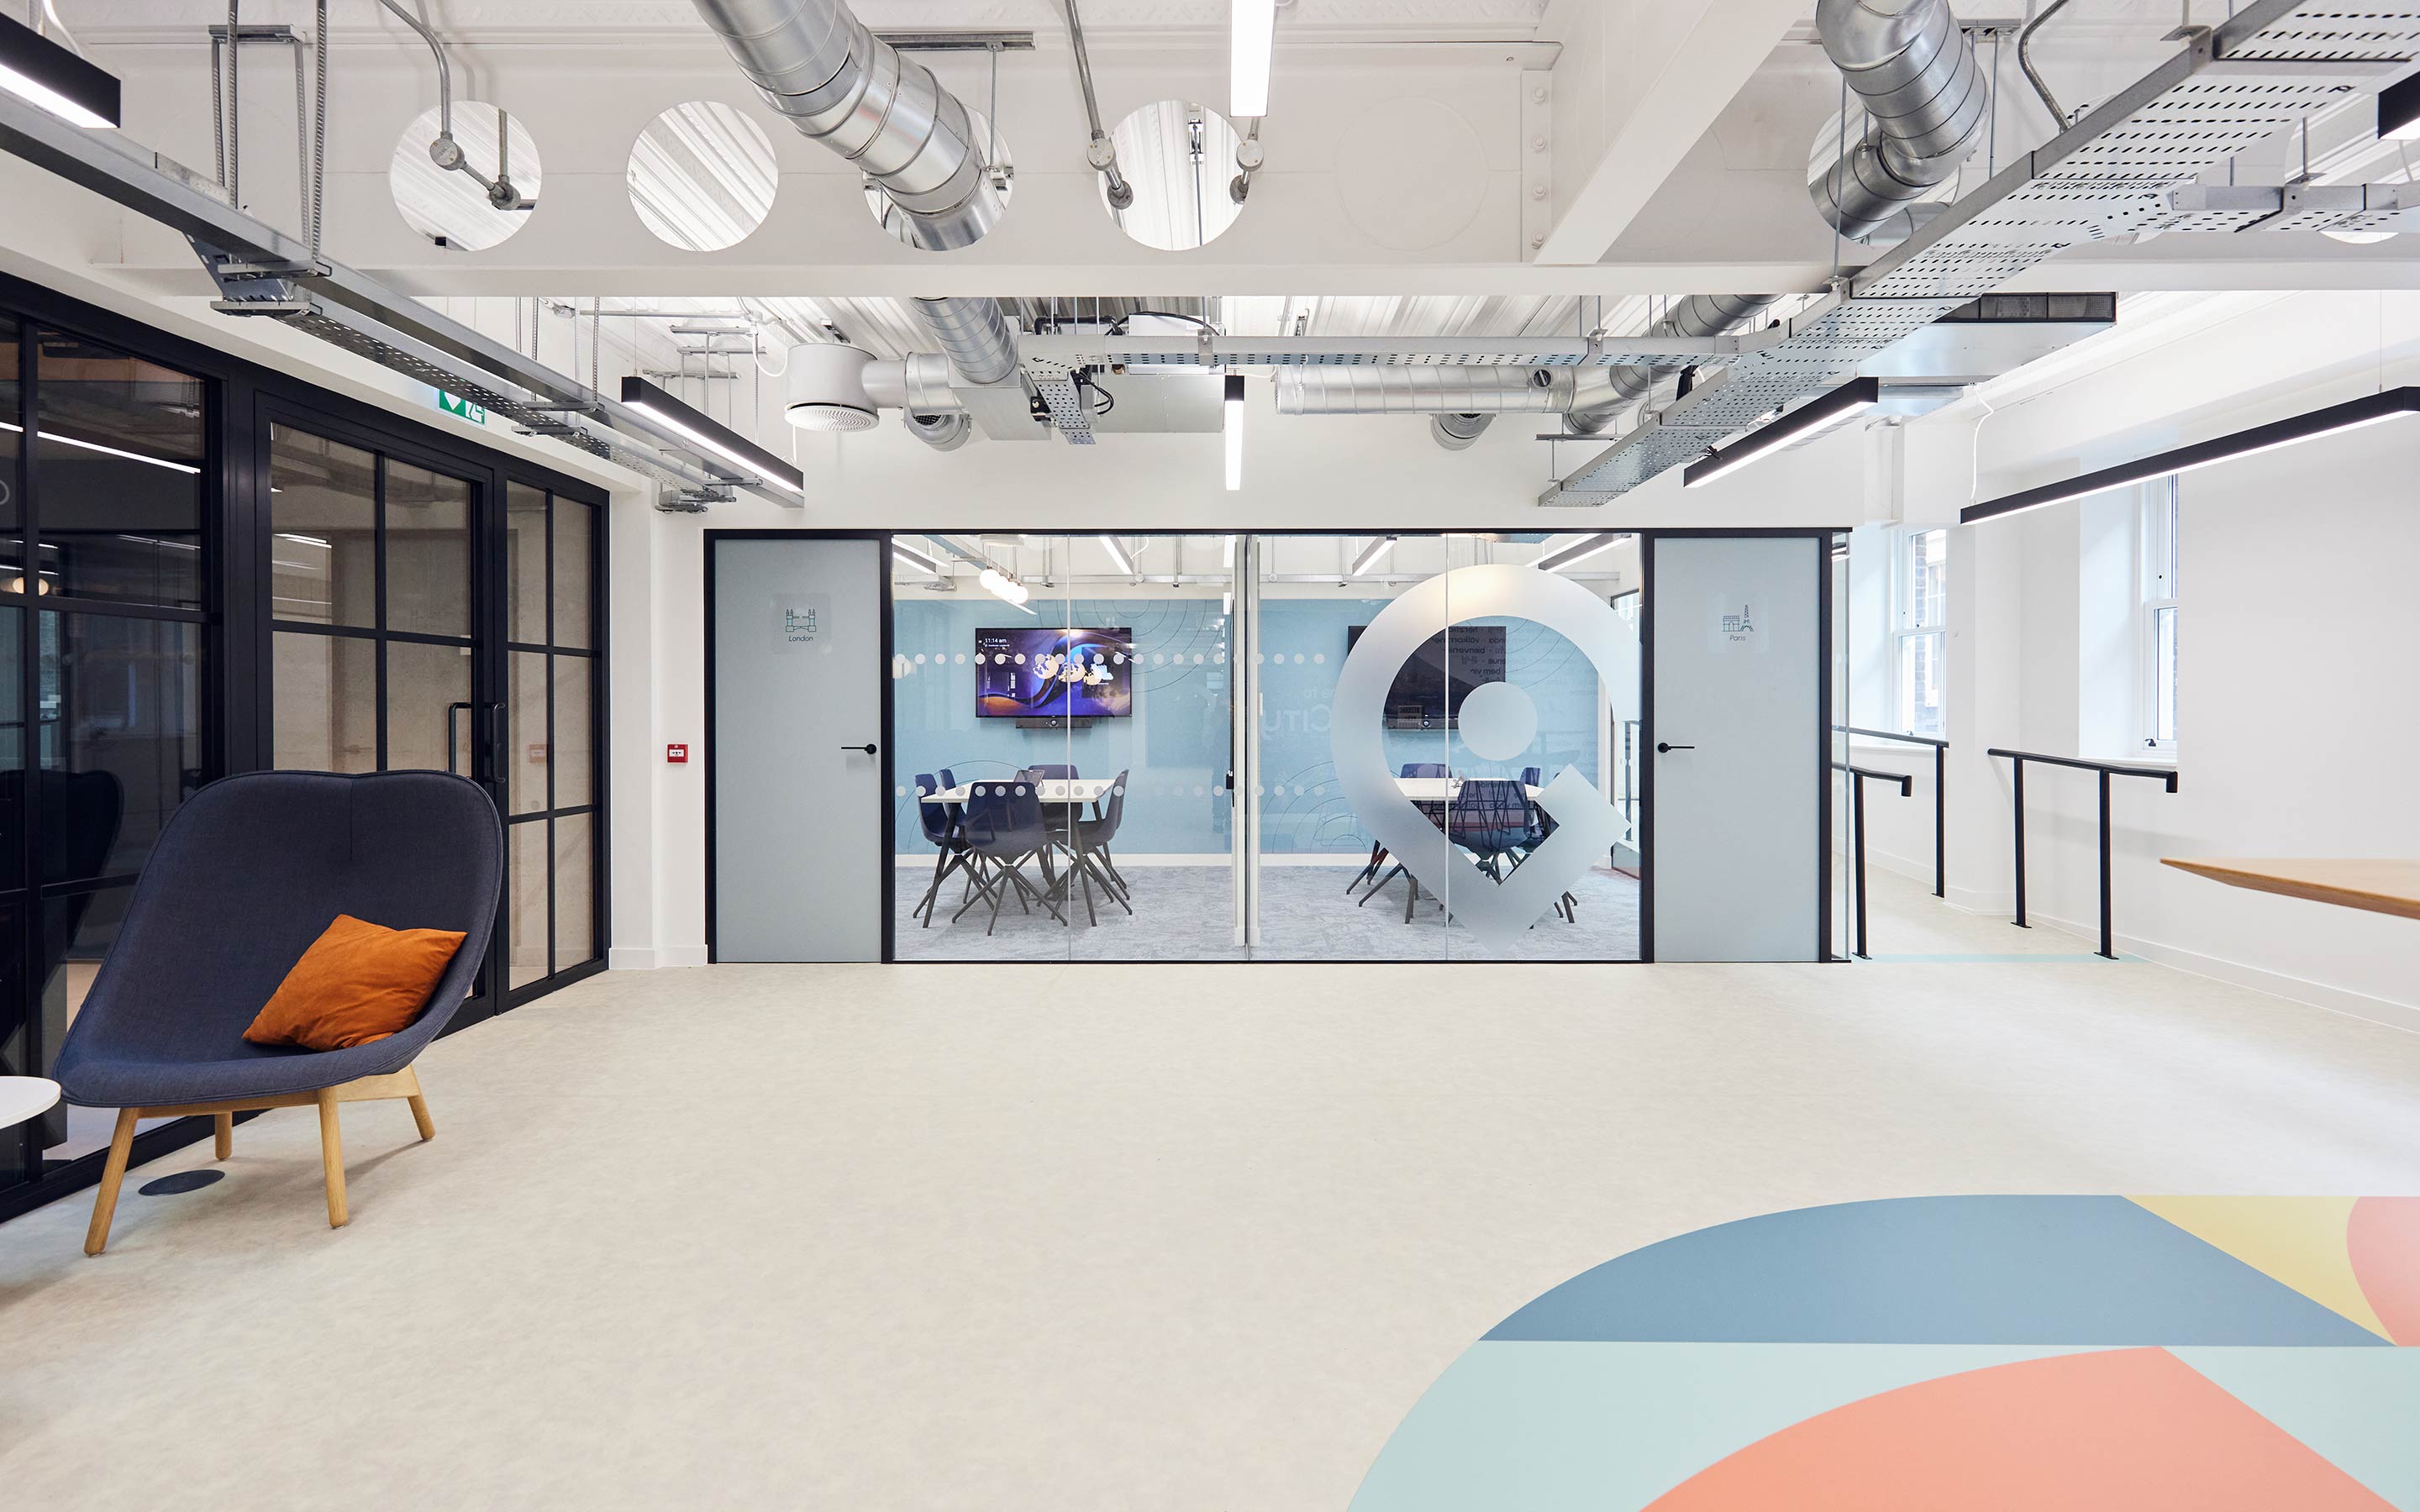 The image shows two meeting rooms with graphic manifestations on the glass